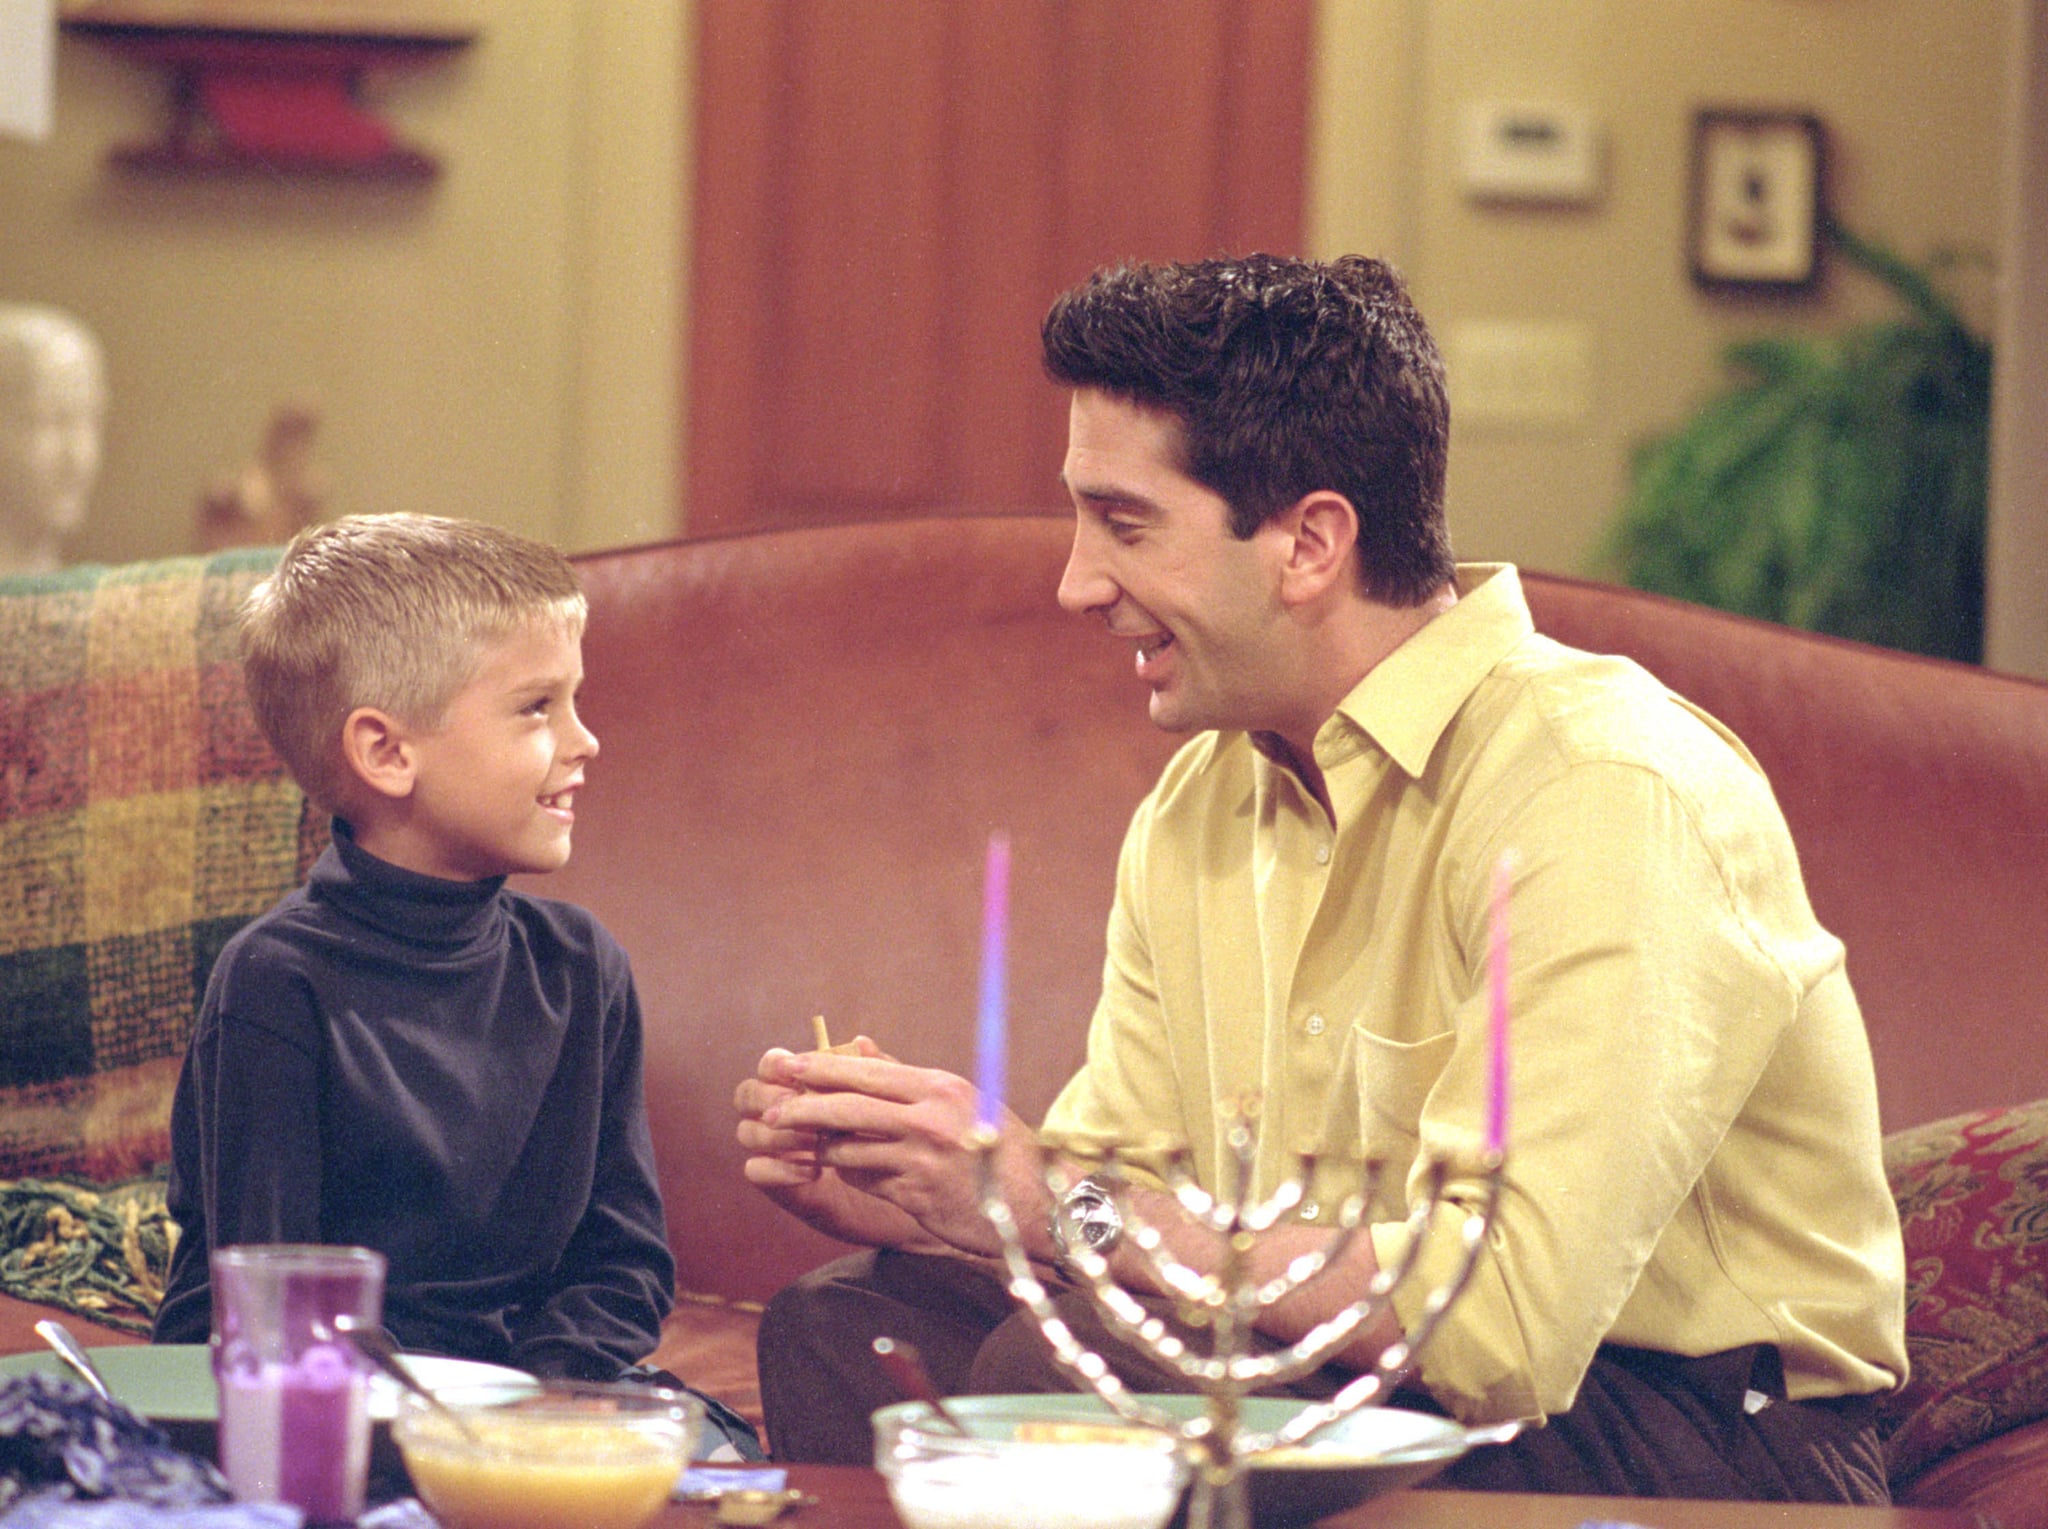 385848 23: Actors Cole Mitchell Sprouse (Big Daddy) as Ben and David Schwimmer as Ross Geller star in NBC's comedy series 